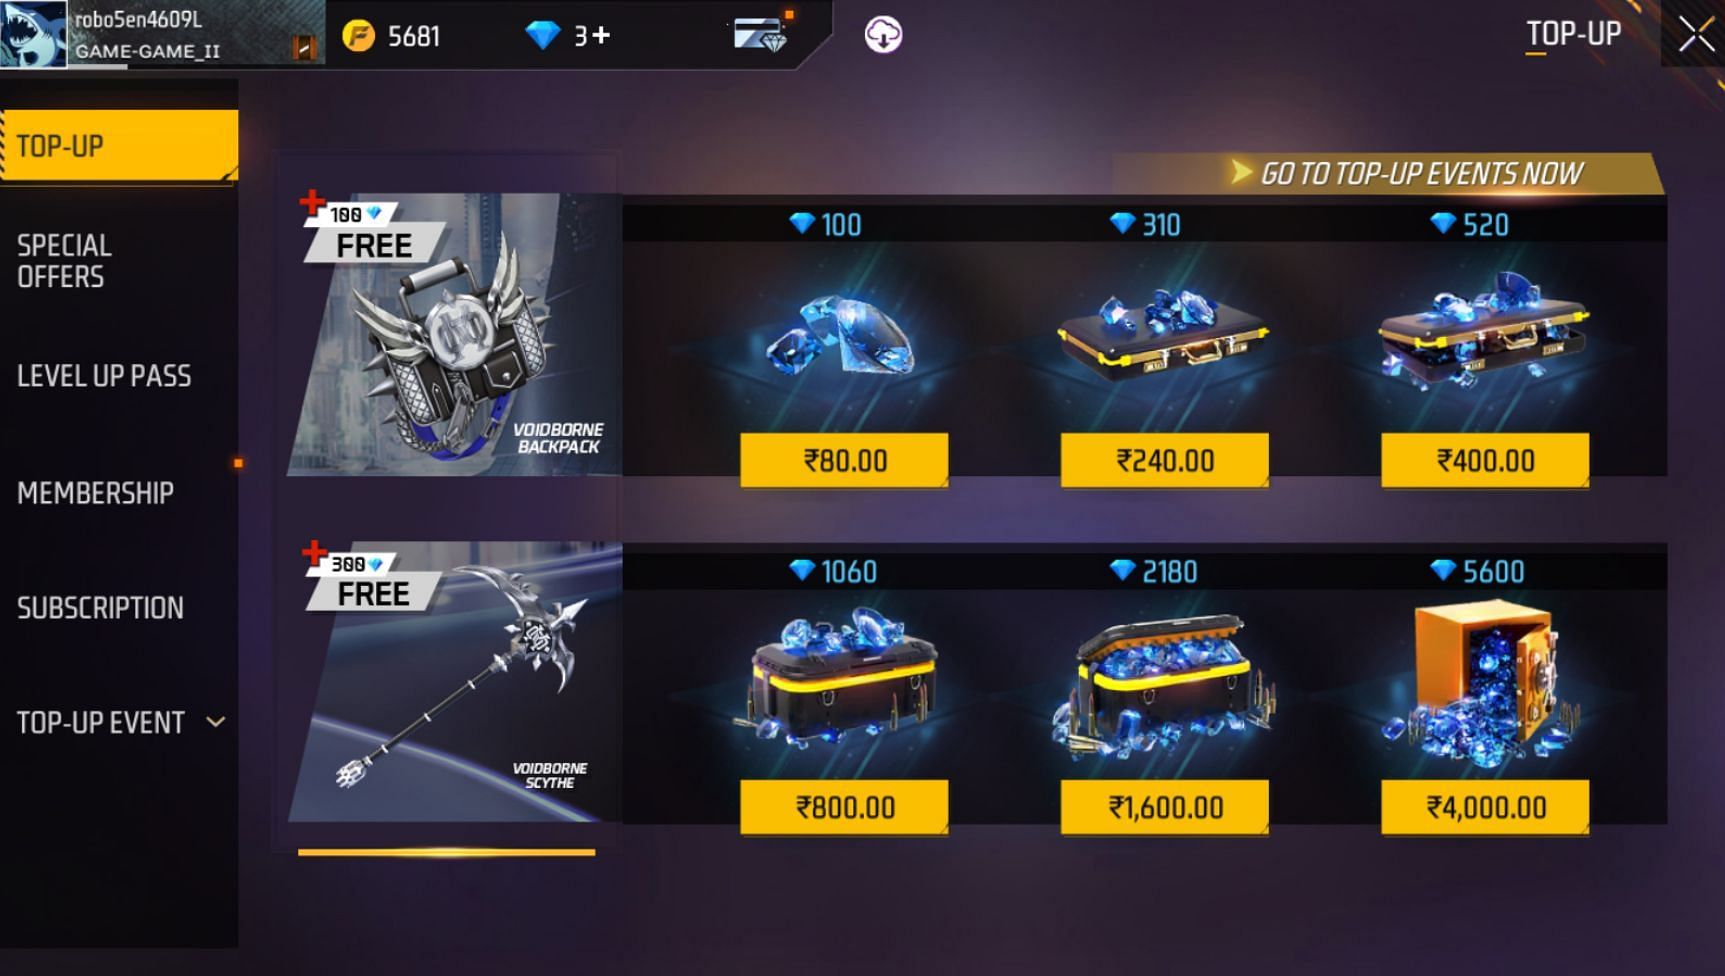 How to top-up diamonds in Free Fire MAX using the in-game service? (Image via Garena)